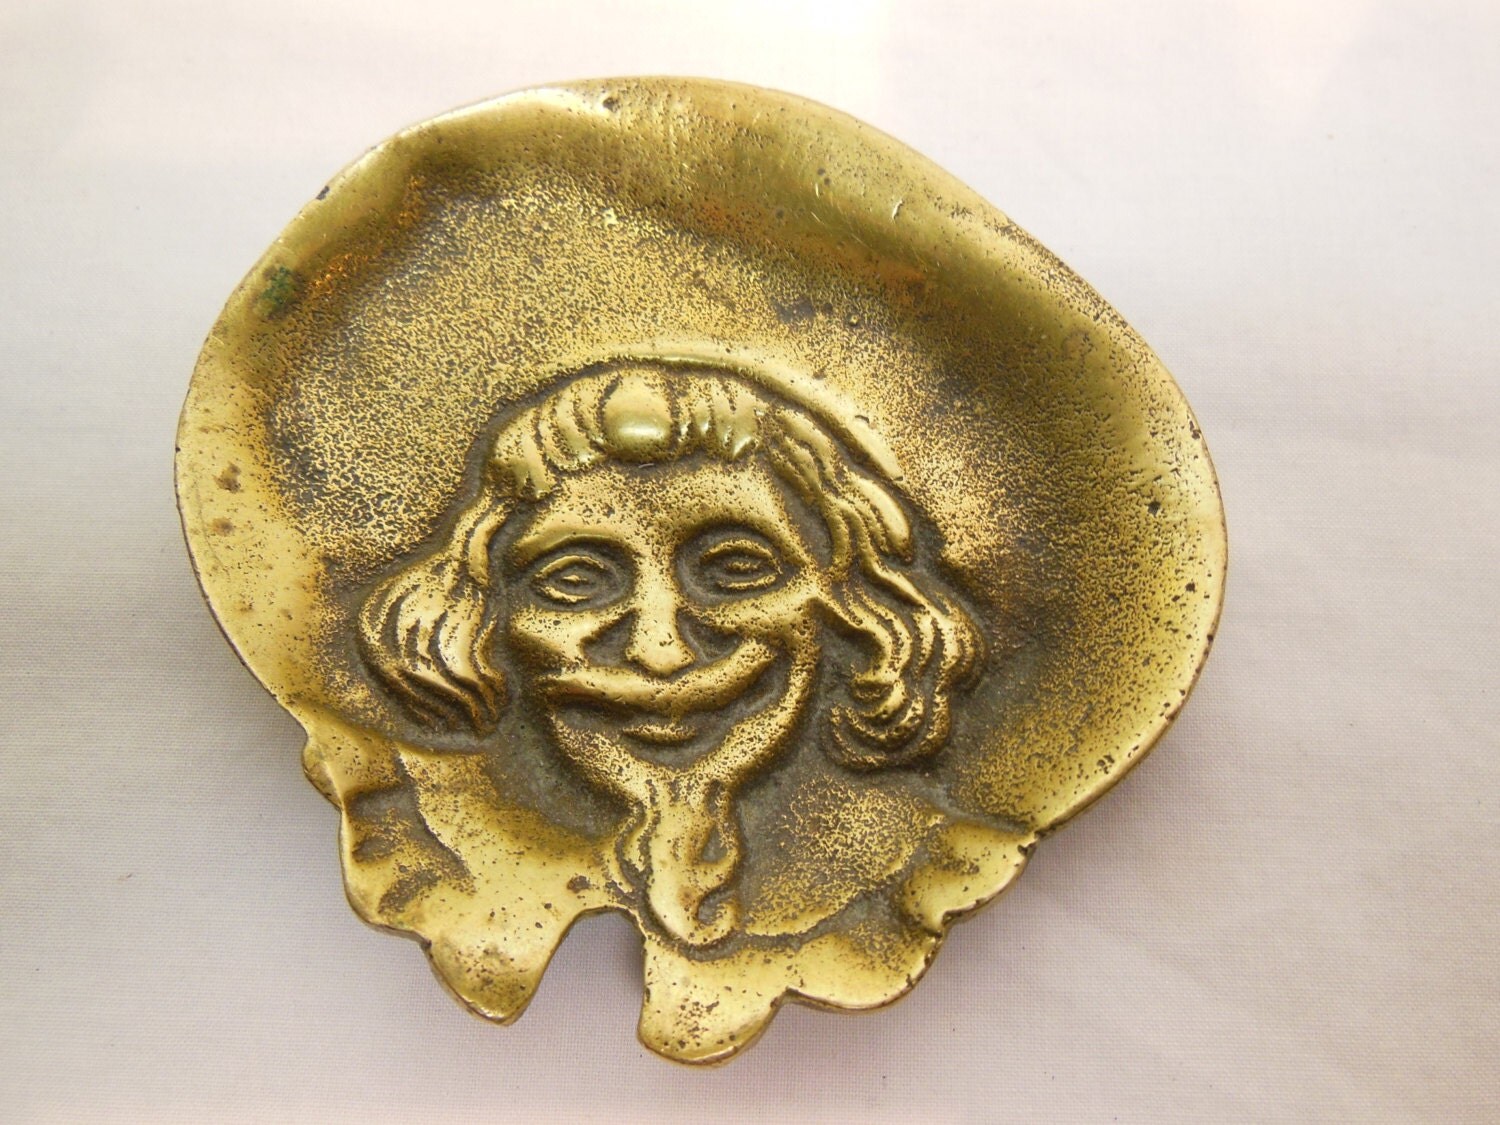 Vintage Forged Brass Trinket Dish Portrait of Man from Gothic